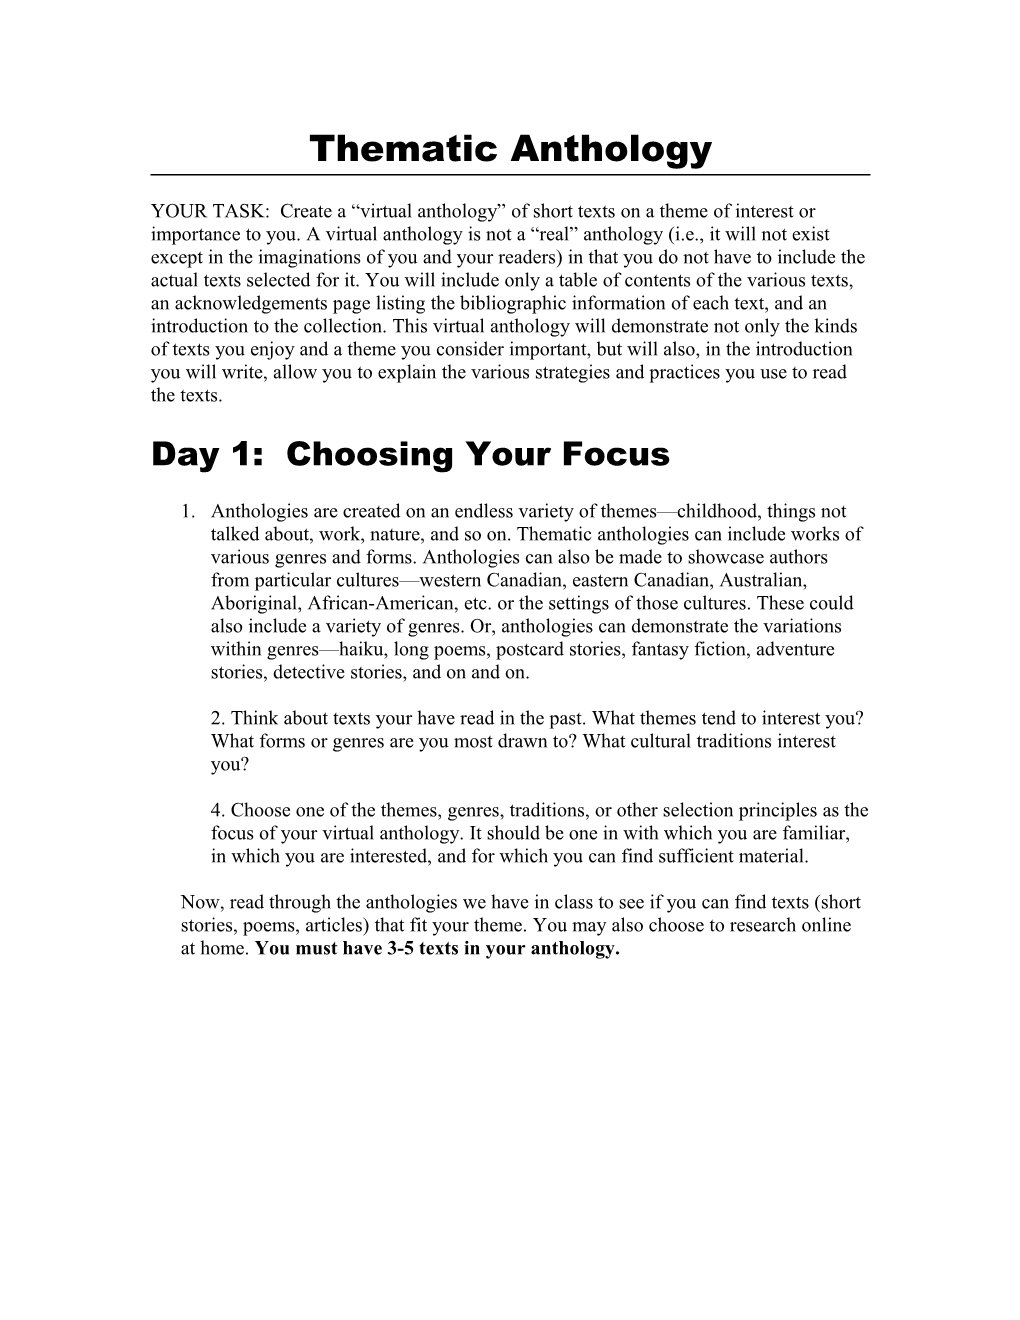 Day 1: Choosing Your Focus